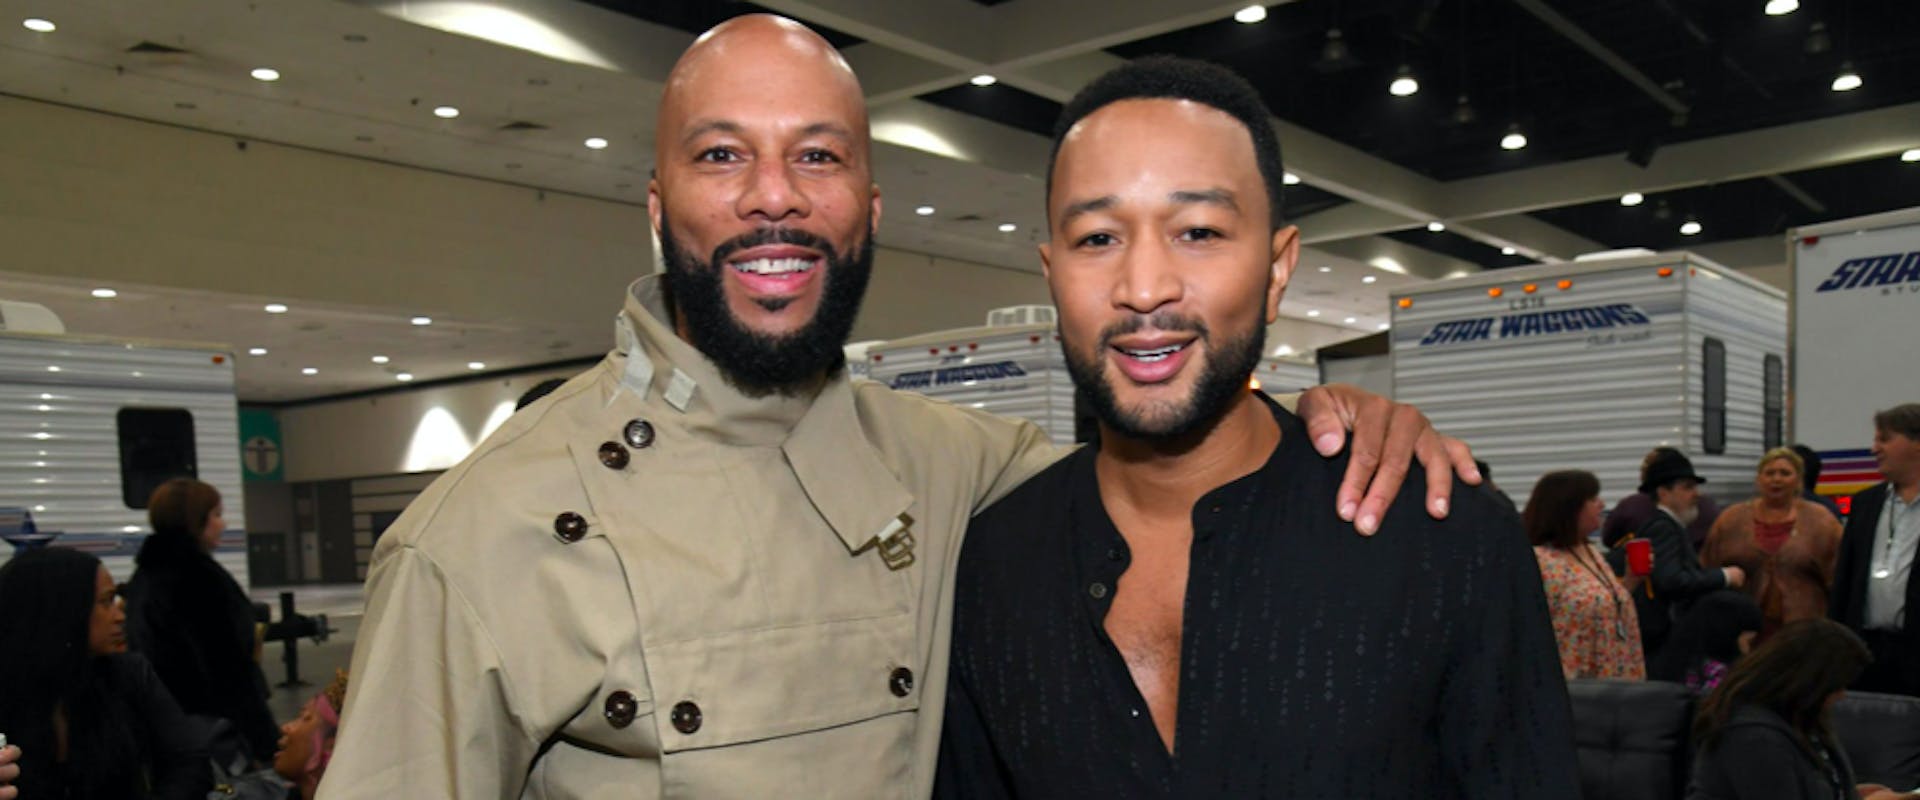 LOS ANGELES, CALIFORNIA - JANUARY 28: (L-R) Common and John Legend attend the 62nd Annual GRAMMY Awards "Let's Go Crazy" The GRAMMY Salute To Prince on January 28, 2020 in Los Angeles, California. 